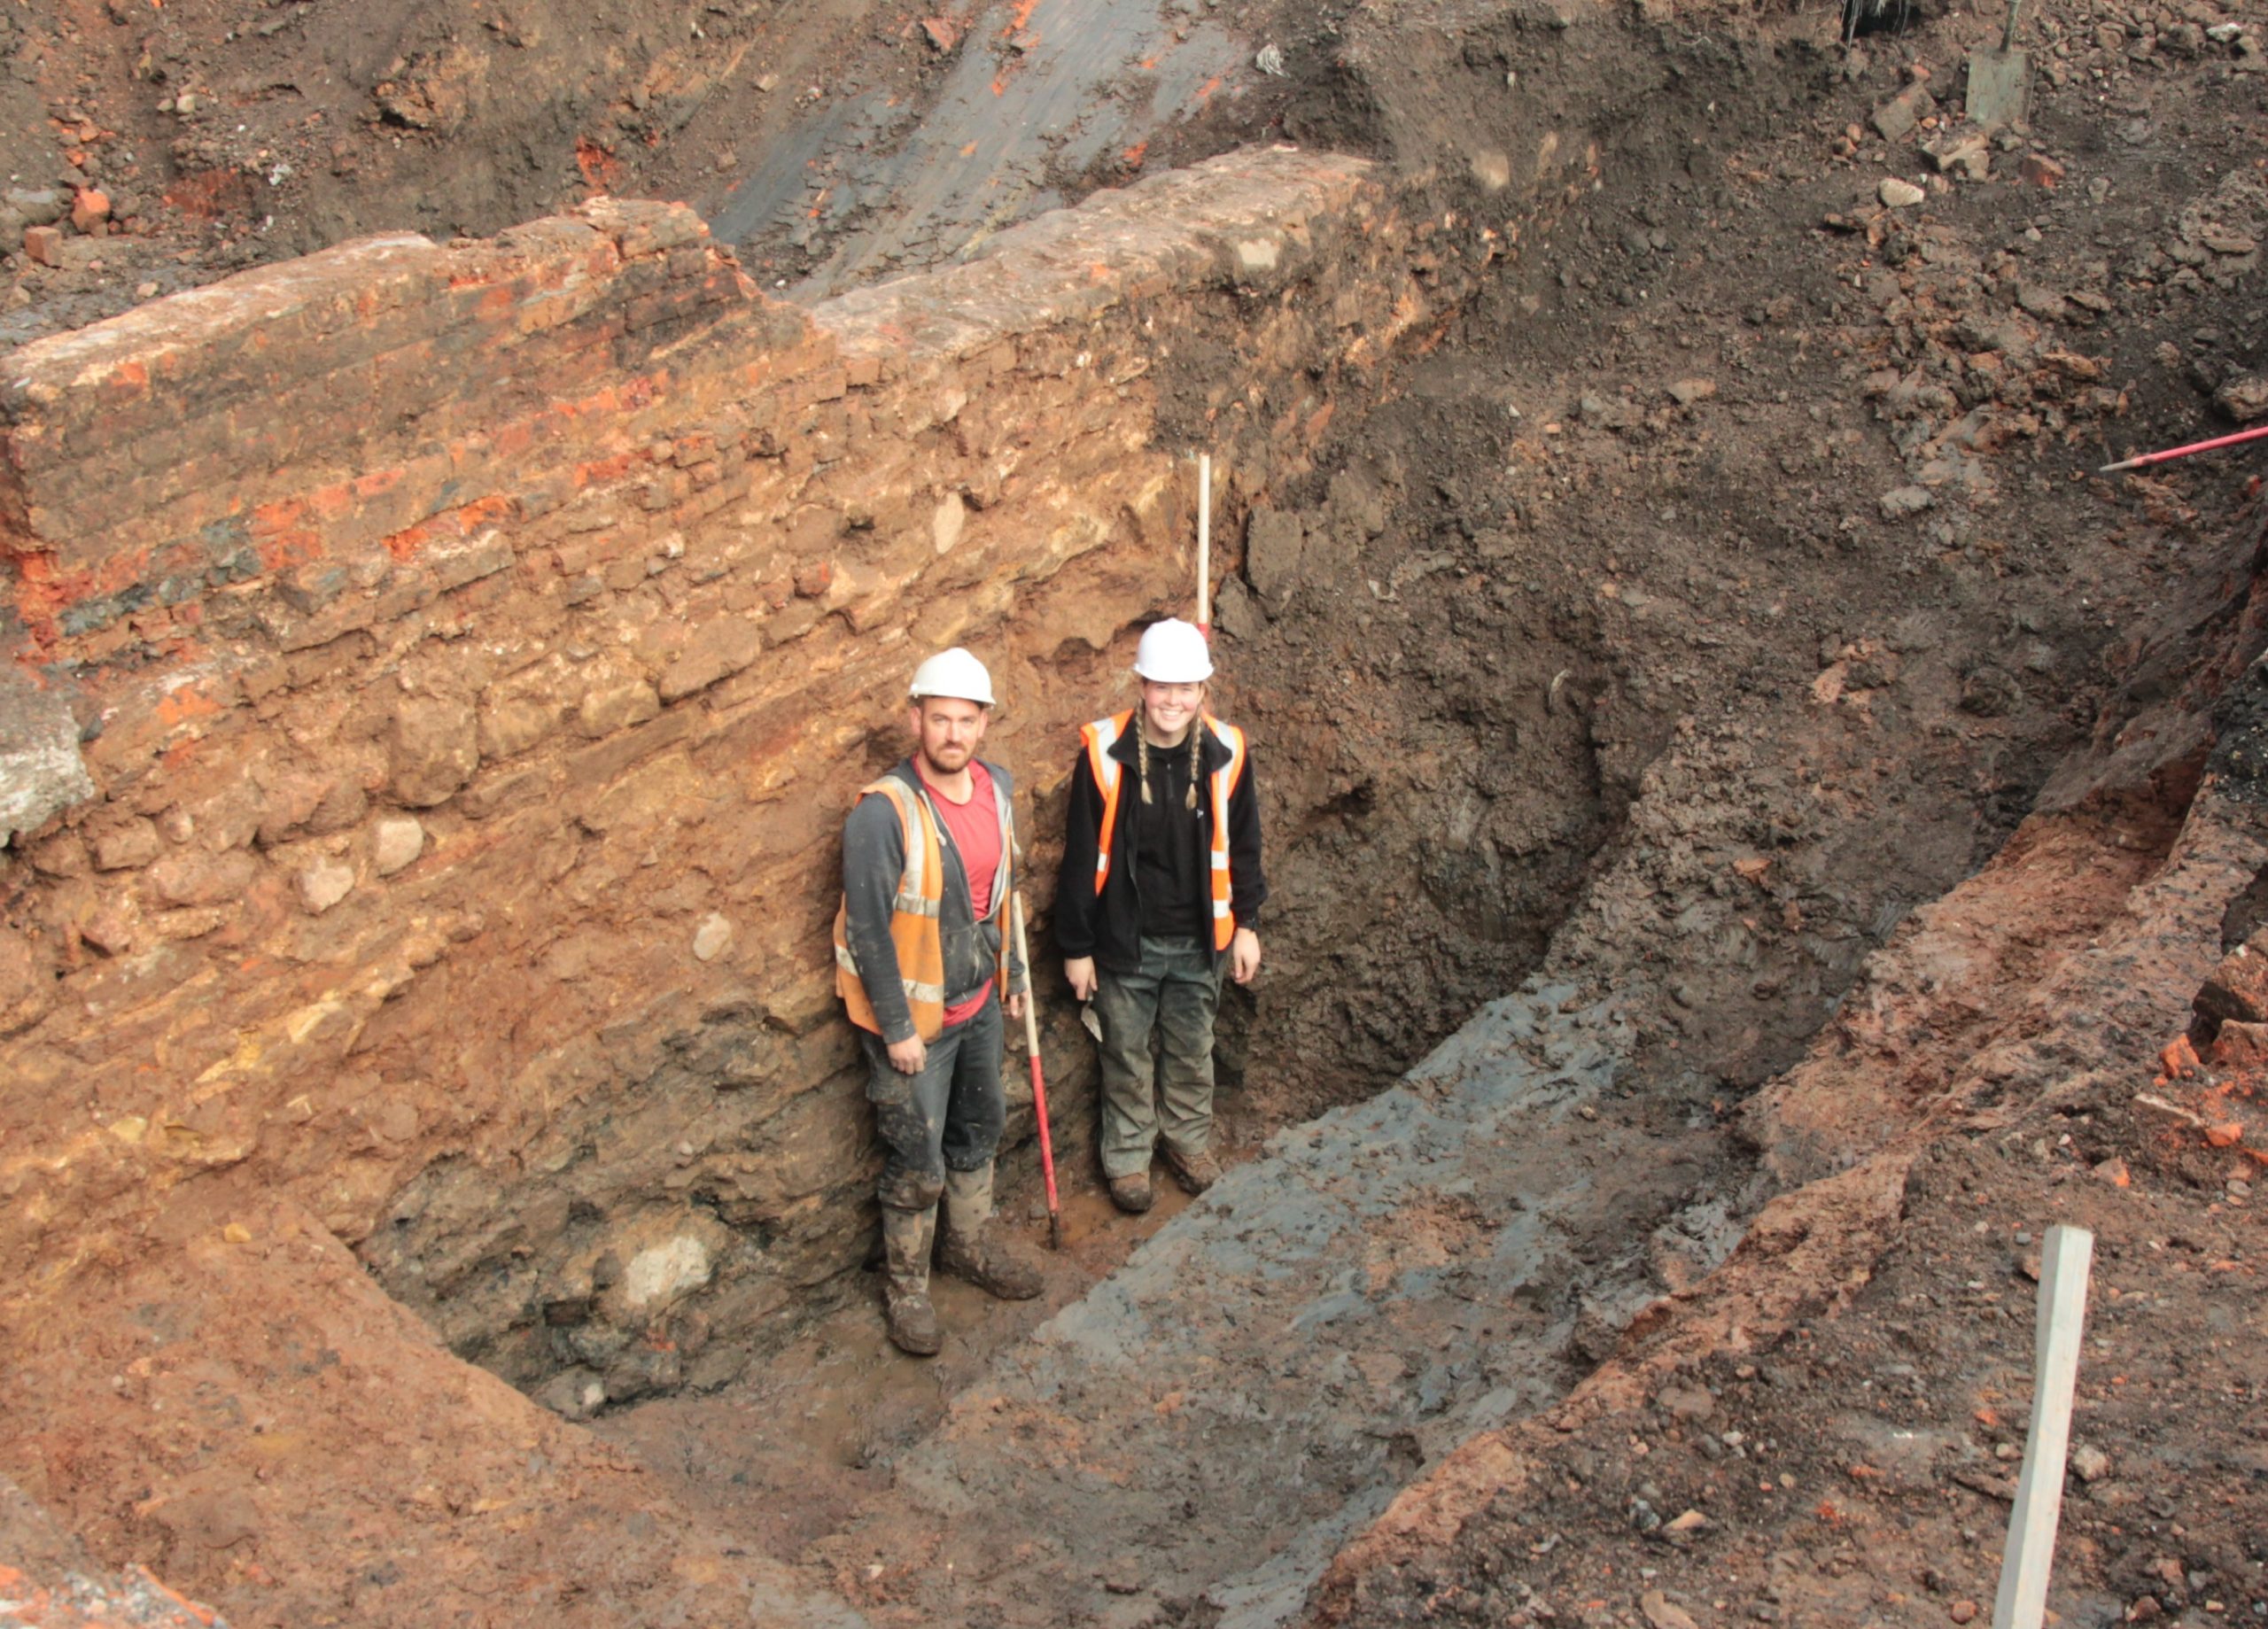 Two archaeologists in excavated moat slot